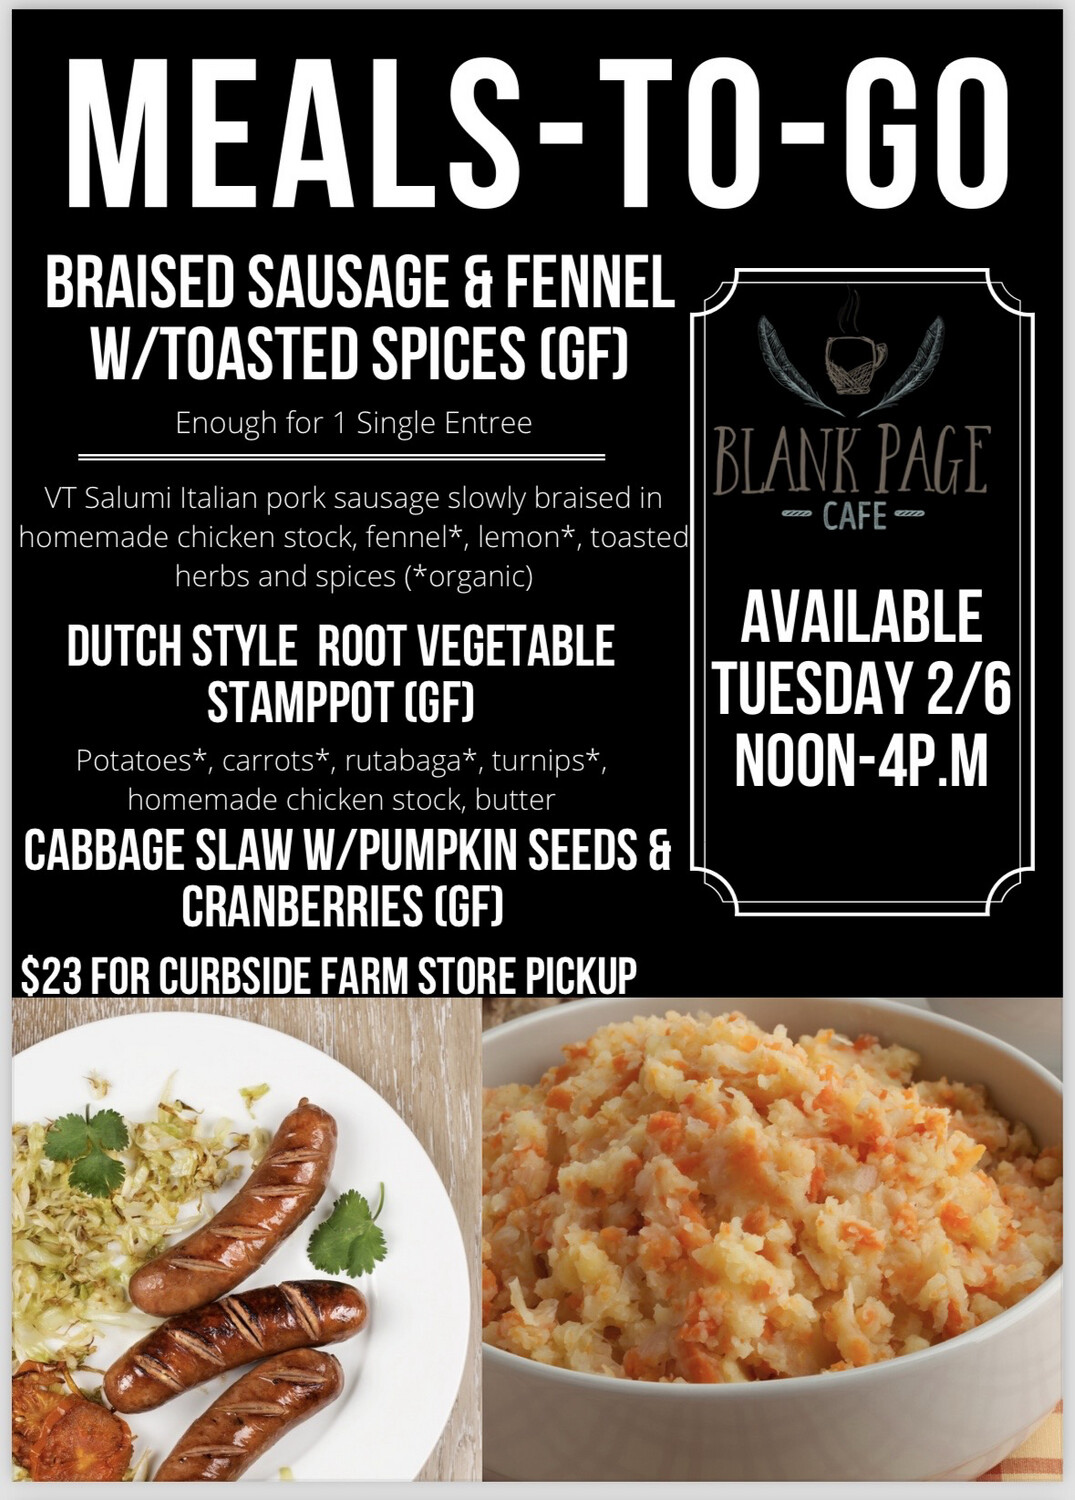 Tuesday 2/06 NOON-4PM PICKUP - Braised Sausage W/Fennel & Toasted Spices + Dutch Style Stamppot + Cabbage Slaw W/Pumpkin Seeds and Cranberries